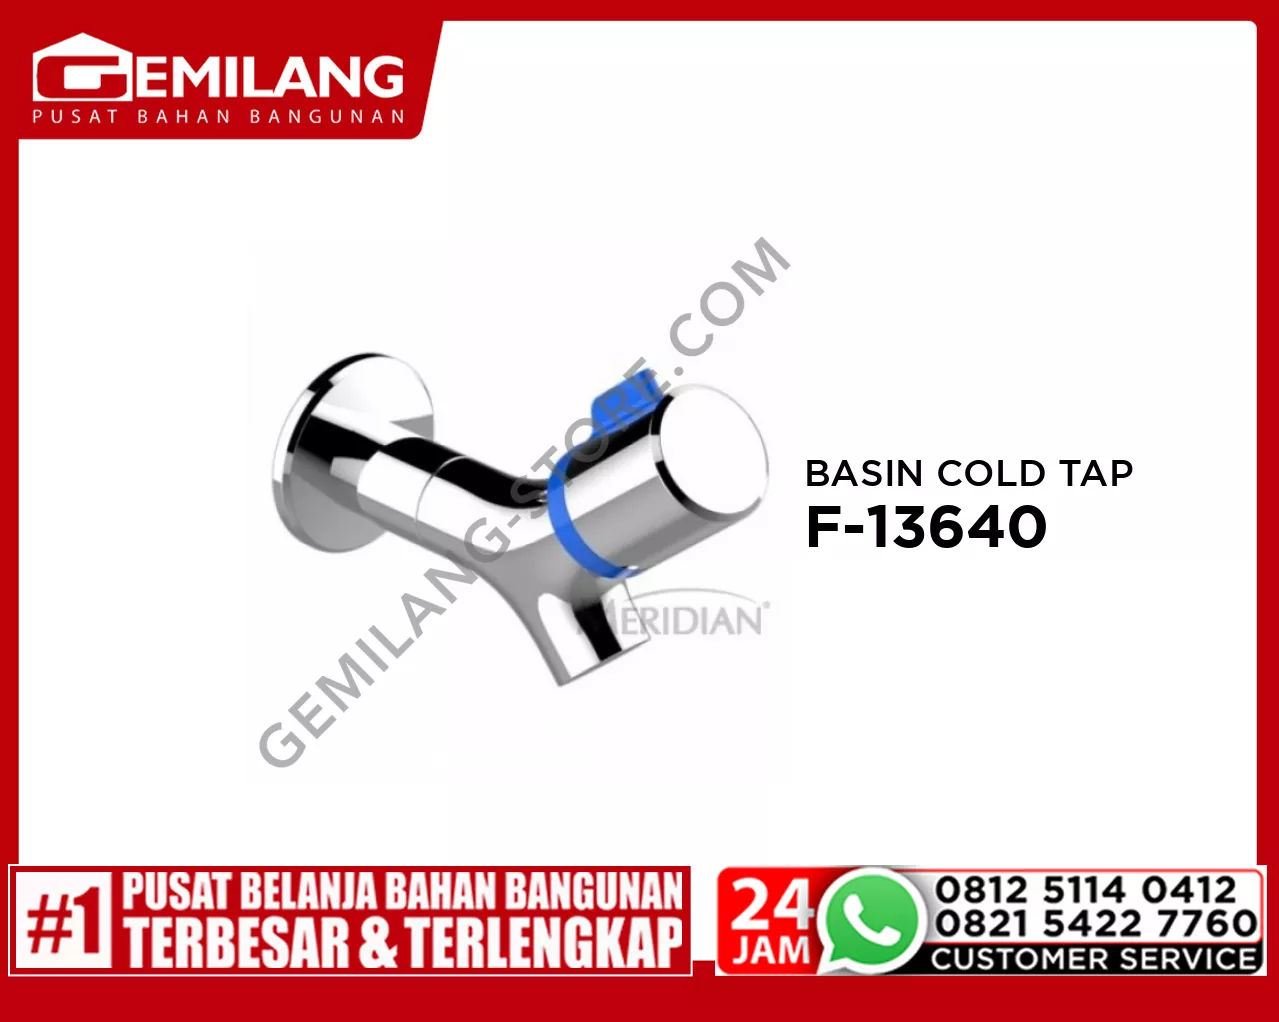 MERIDIAN BASIN COLD TAP F-13640